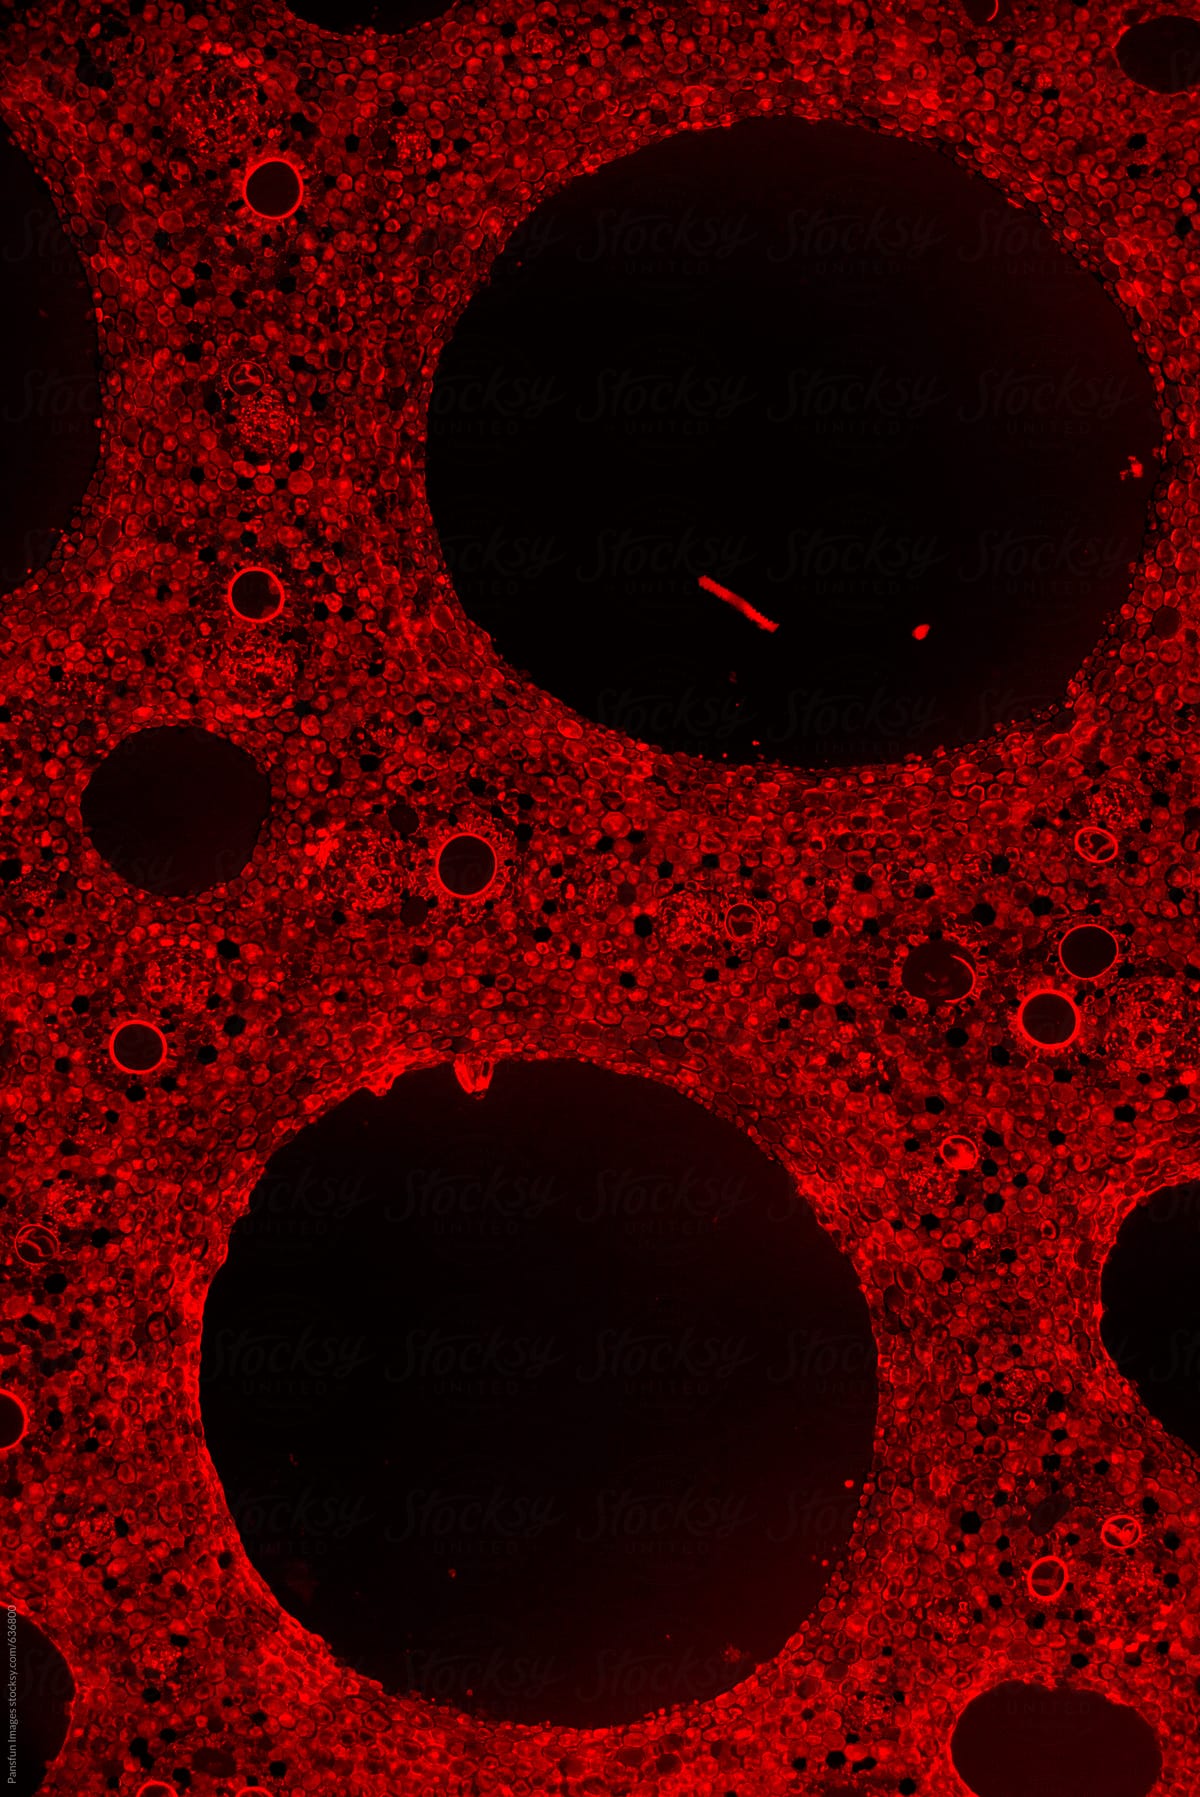 red fluorescent light of plant cells, micrograph